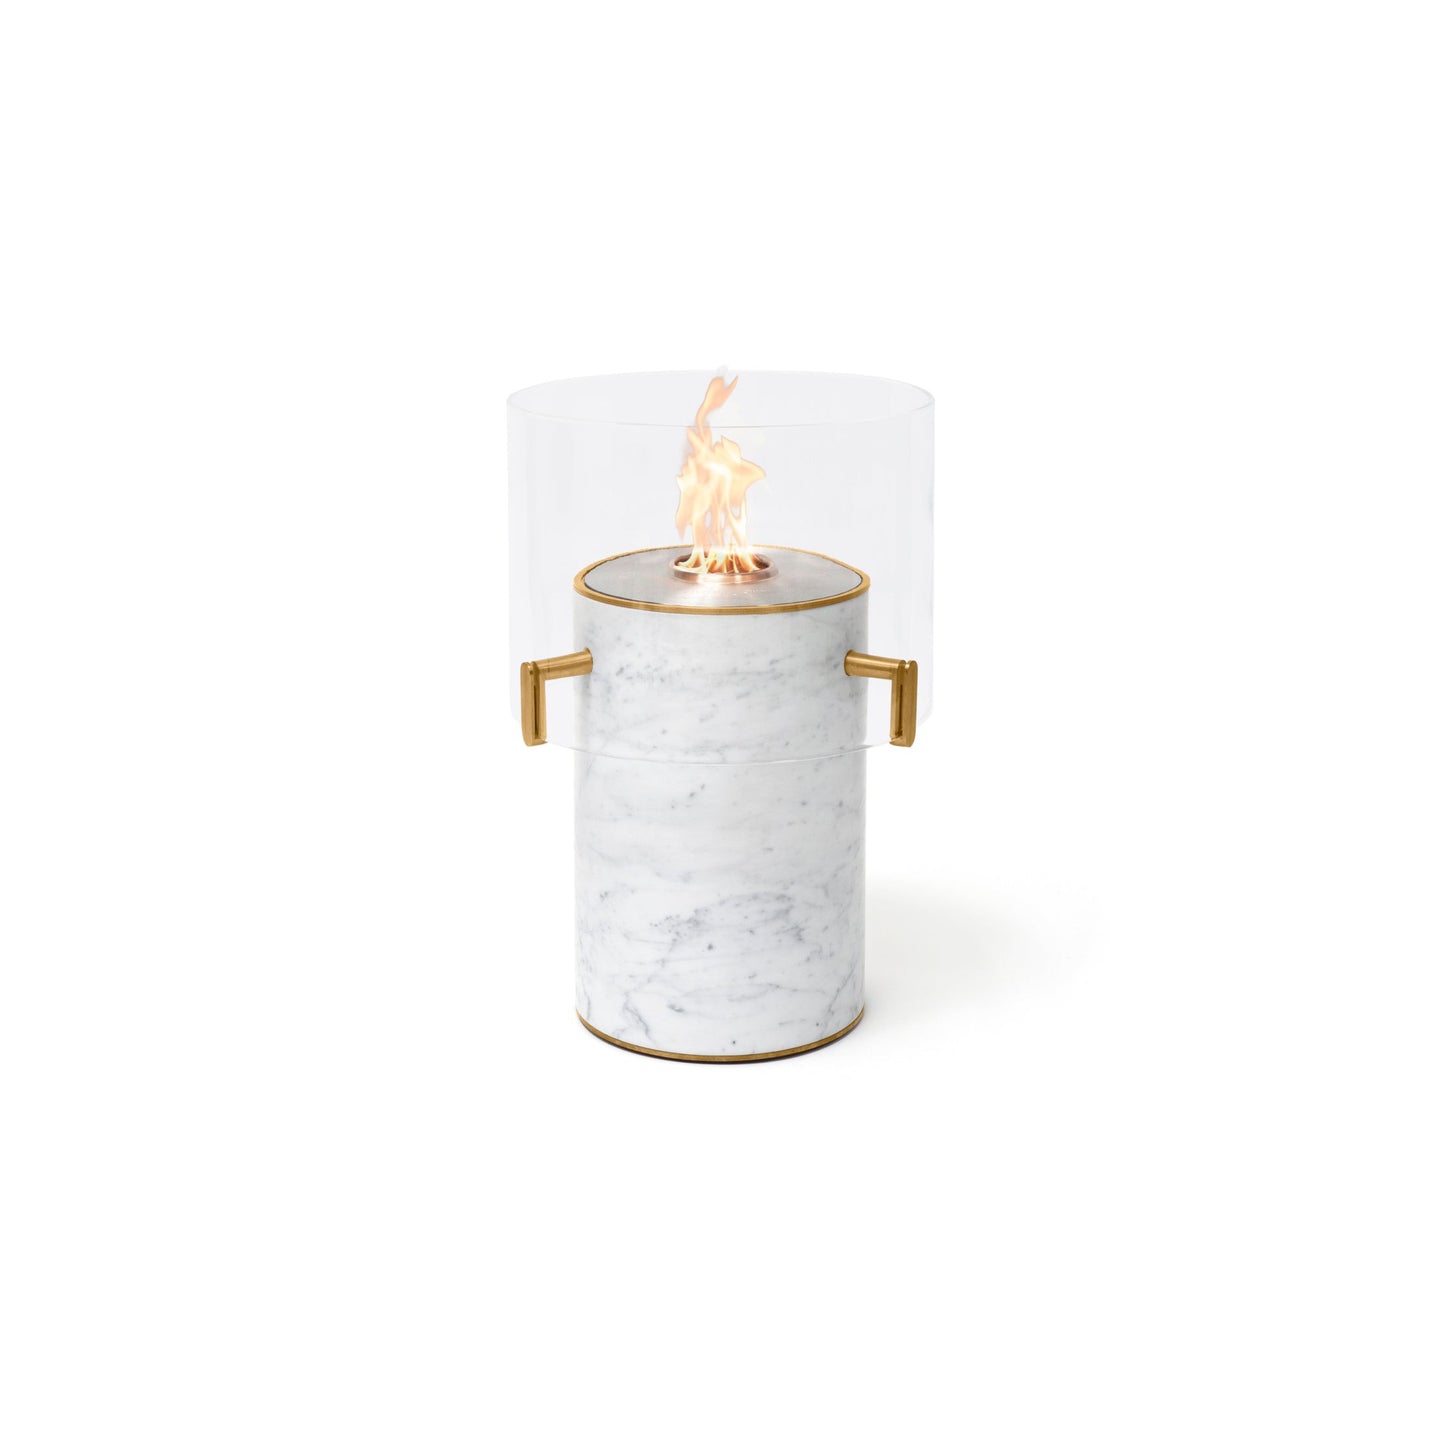 EcoSmart Fire PILLAR 3T 24" Marble White Freestanding Designer Fireplace with Stainless Steel Burner by MAD Design Group